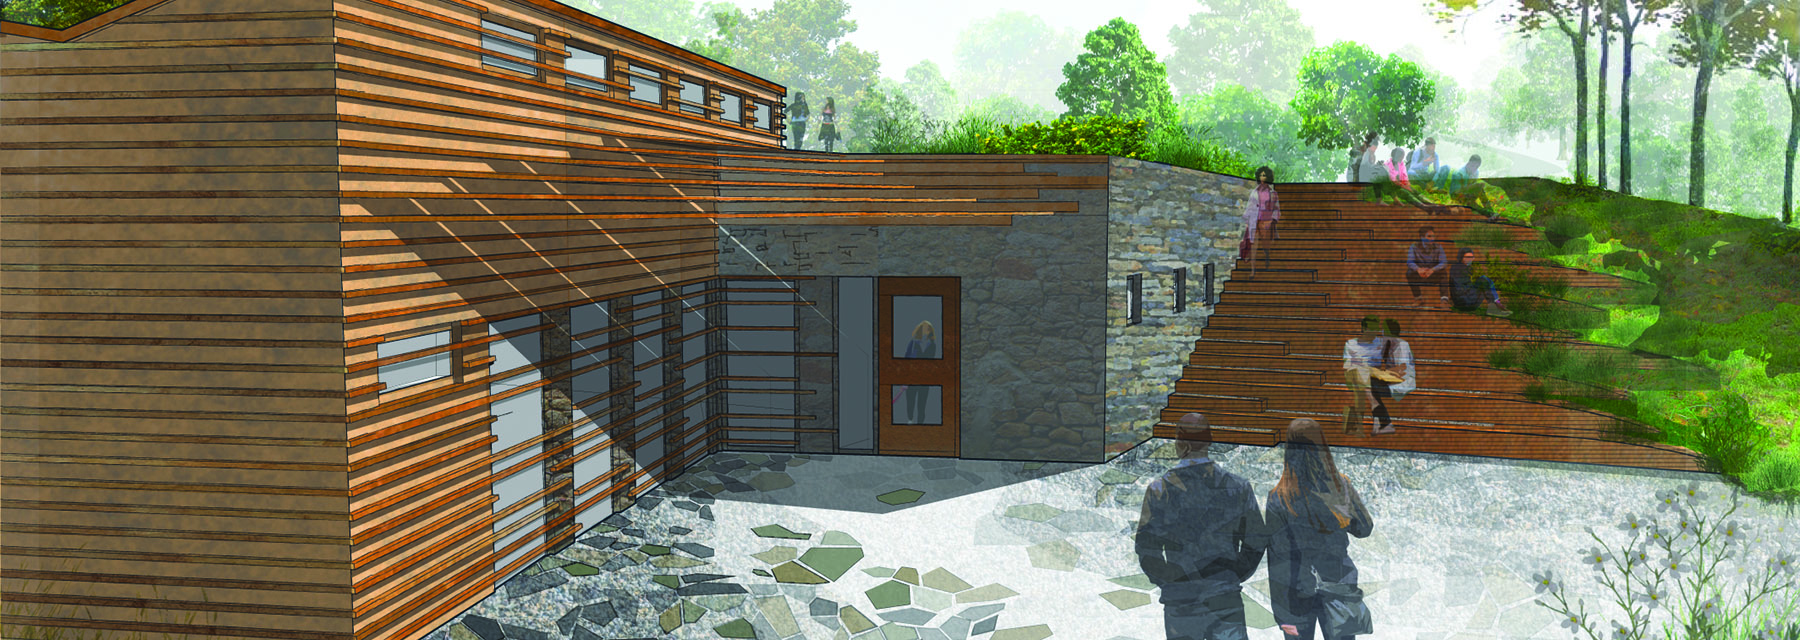 Illustration of the nuthatch hollow living building